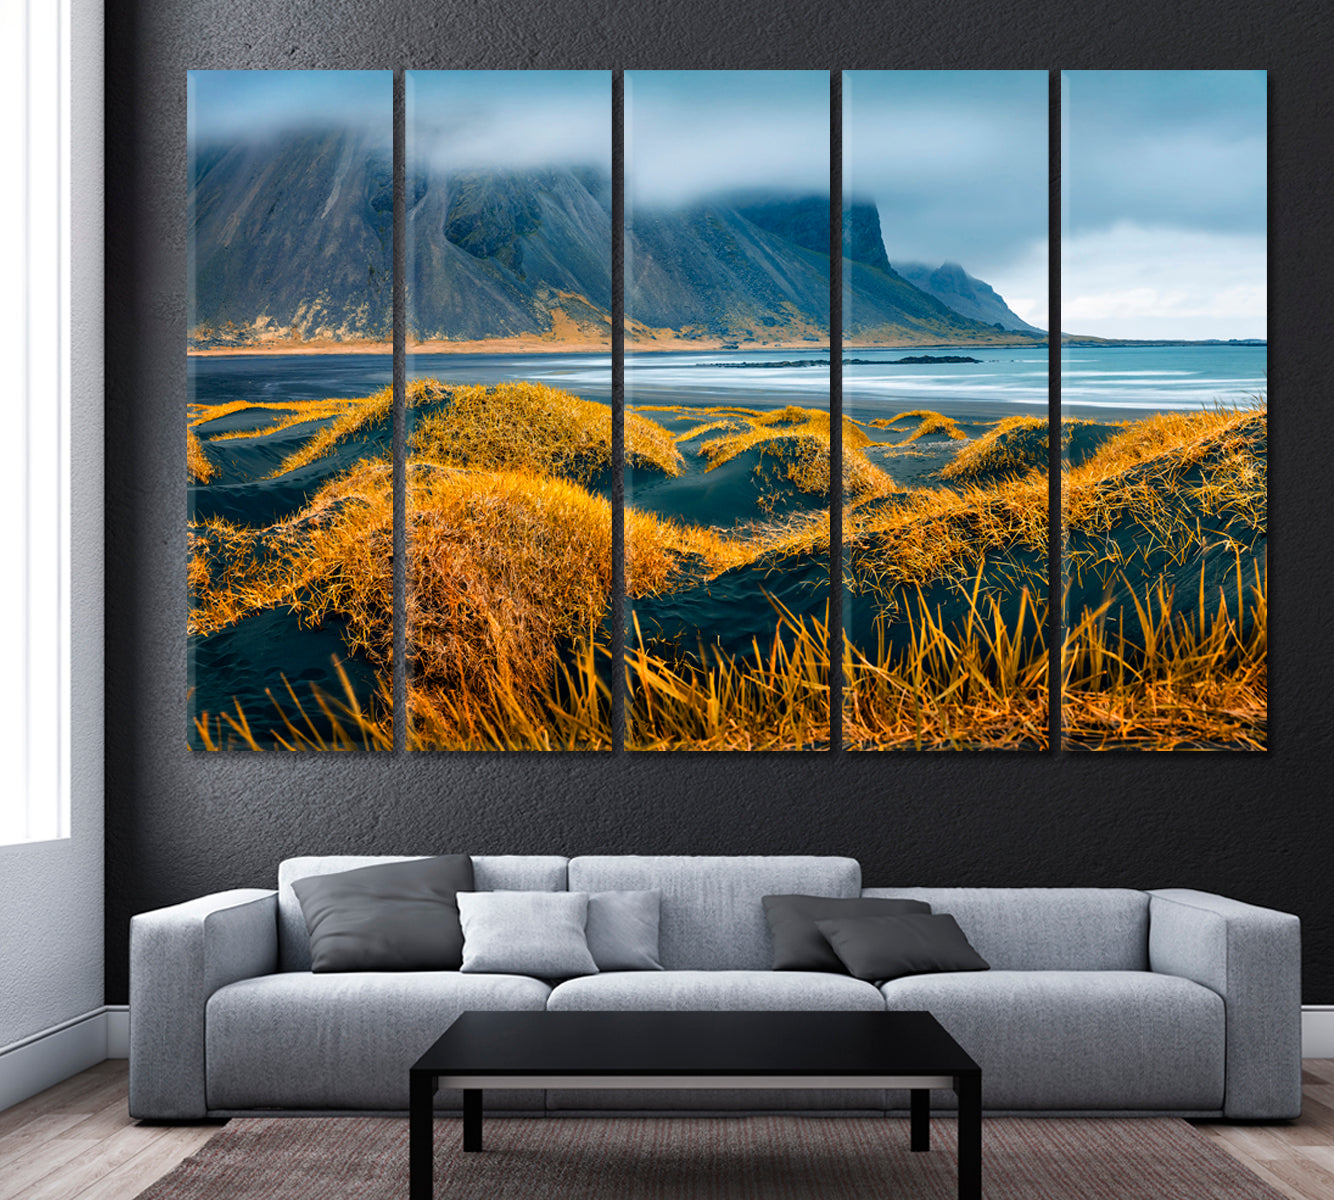 Vestrahorn Mountain and Stokksnes Beach Iceland Canvas Print ArtLexy 5 Panels 36"x24" inches 